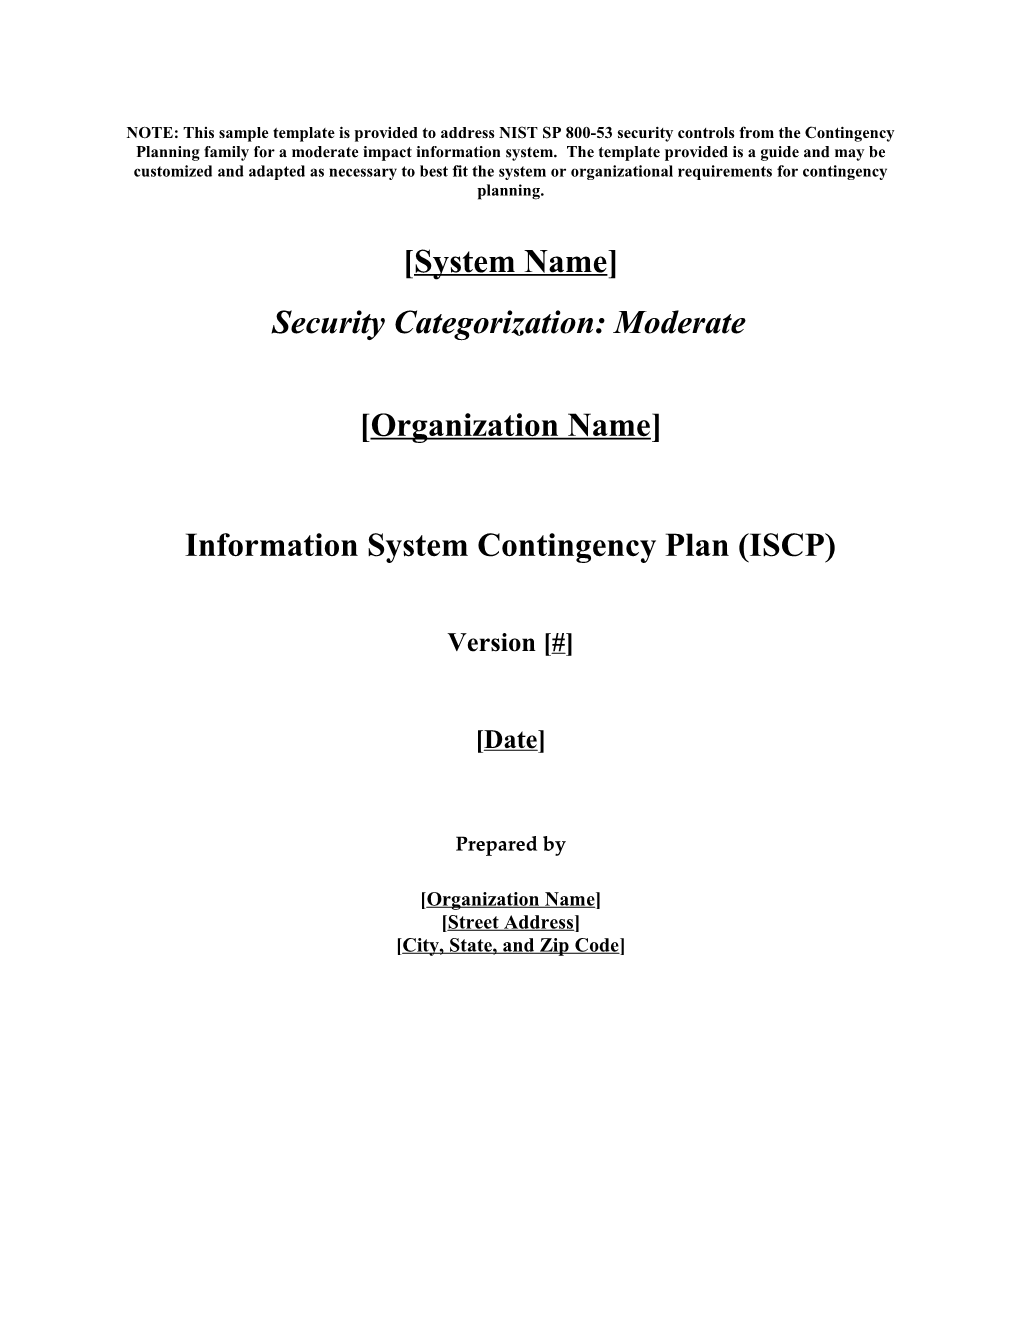 Information System Contingency Plan (ISCP)